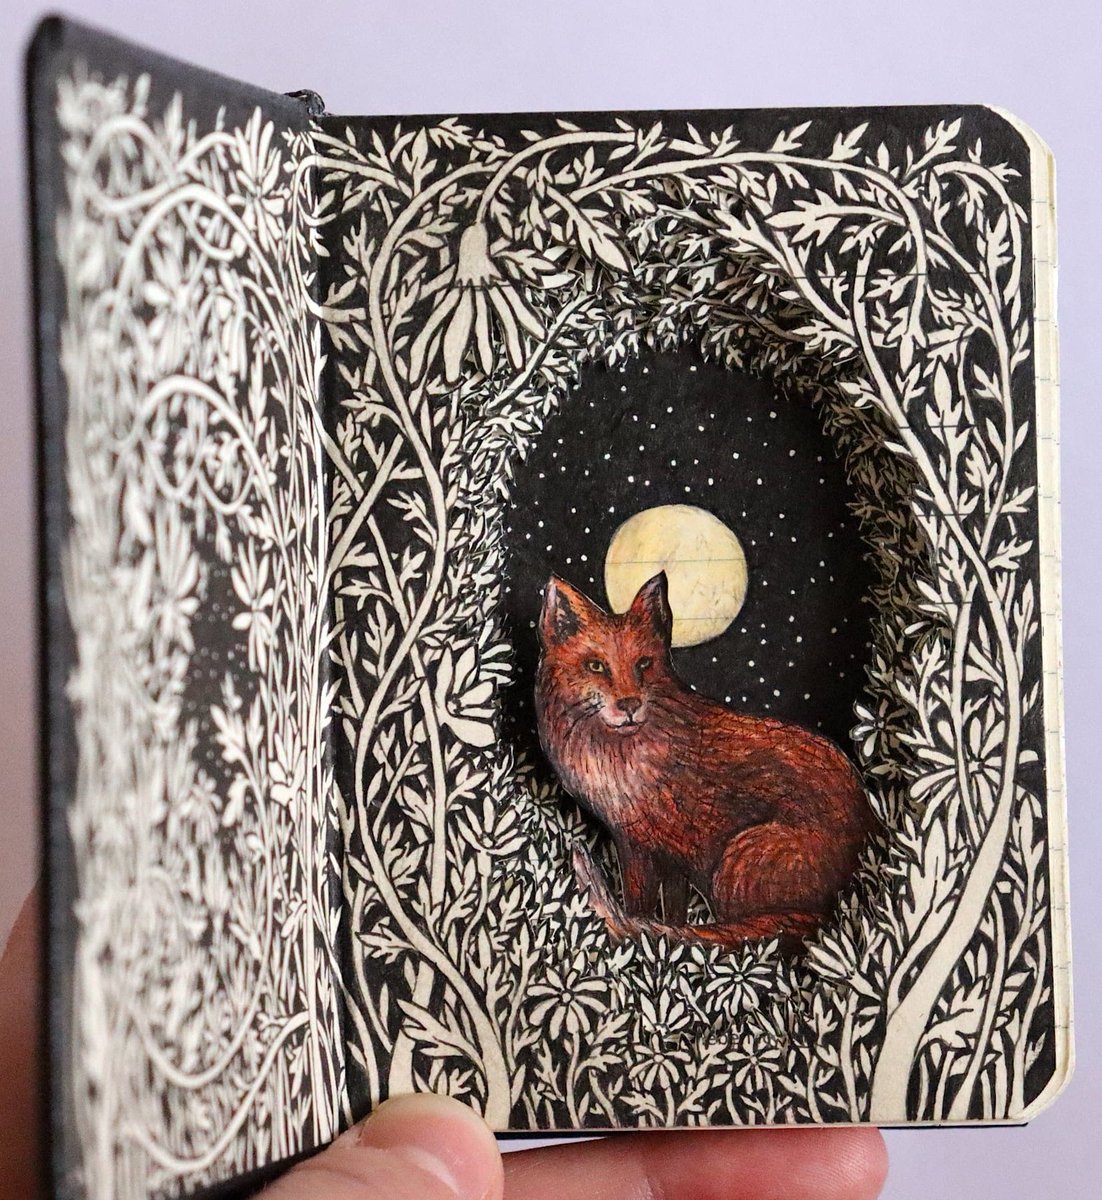 Artist Isobelle Ouzman carves intricate 3D illustrations into discarded books found in dumpsters, recycling bins, and local thrift shops #womensart